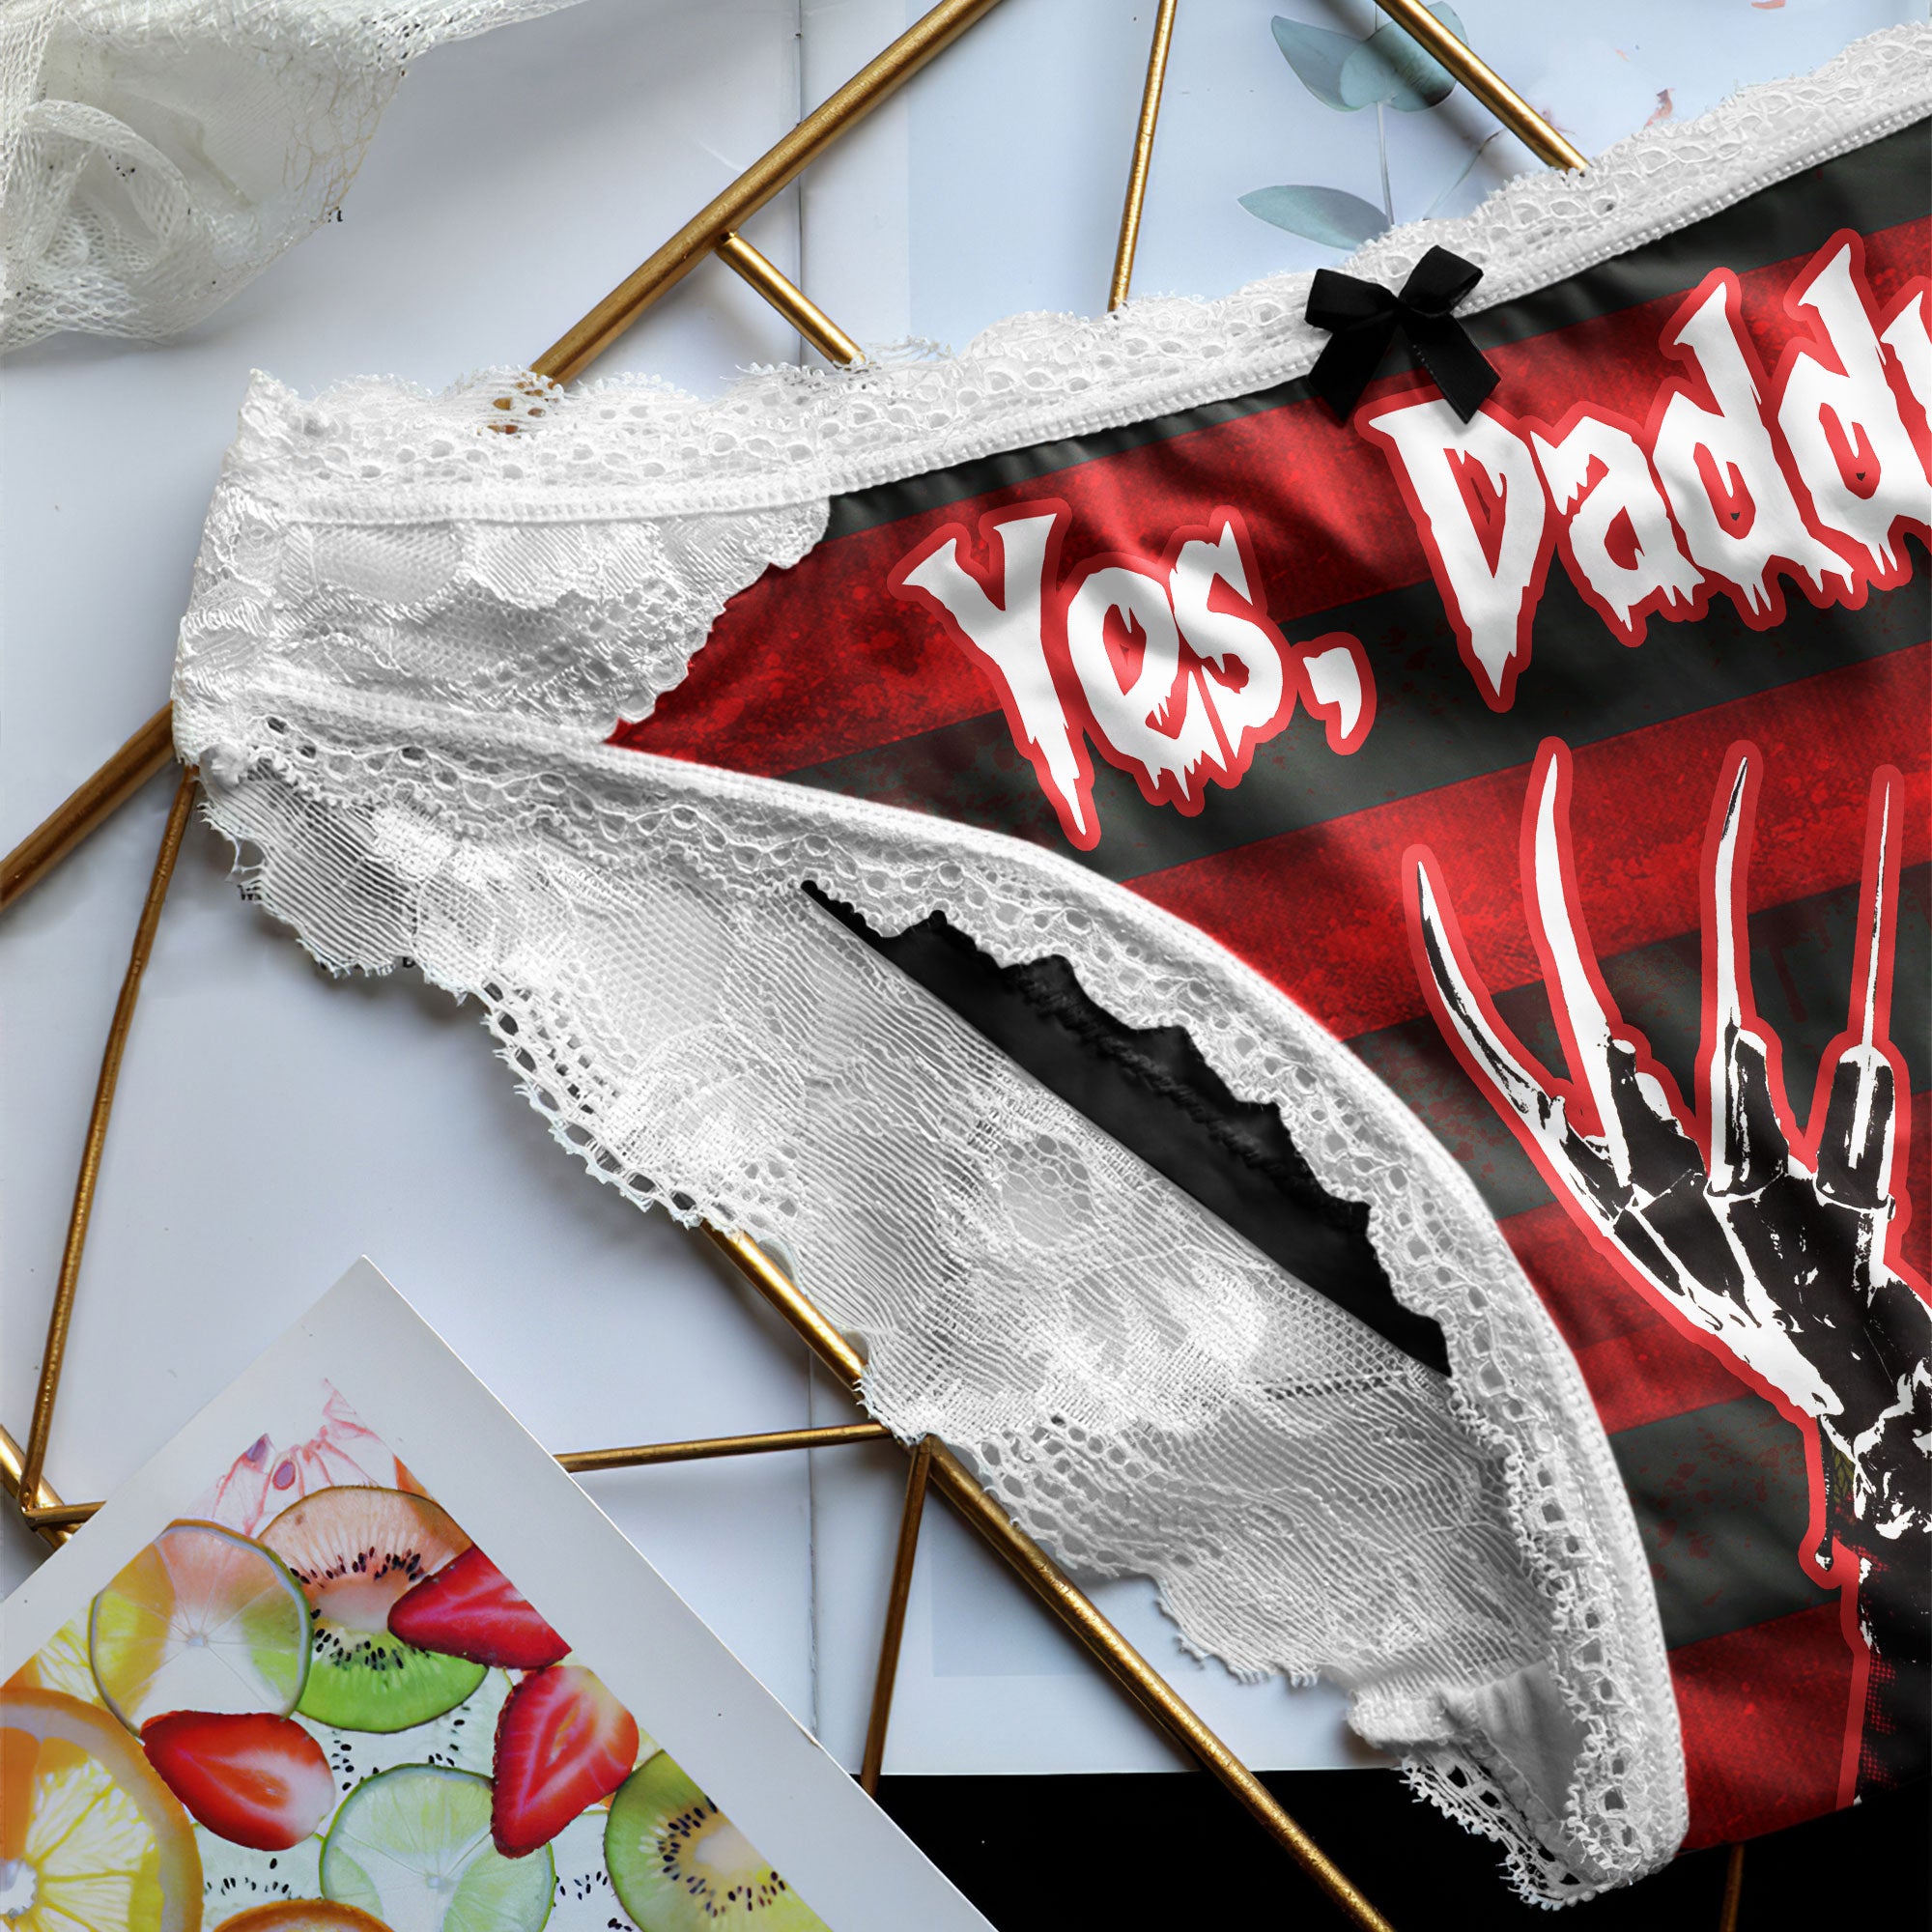 Women's lace undergarment set with cute horror movie theme.